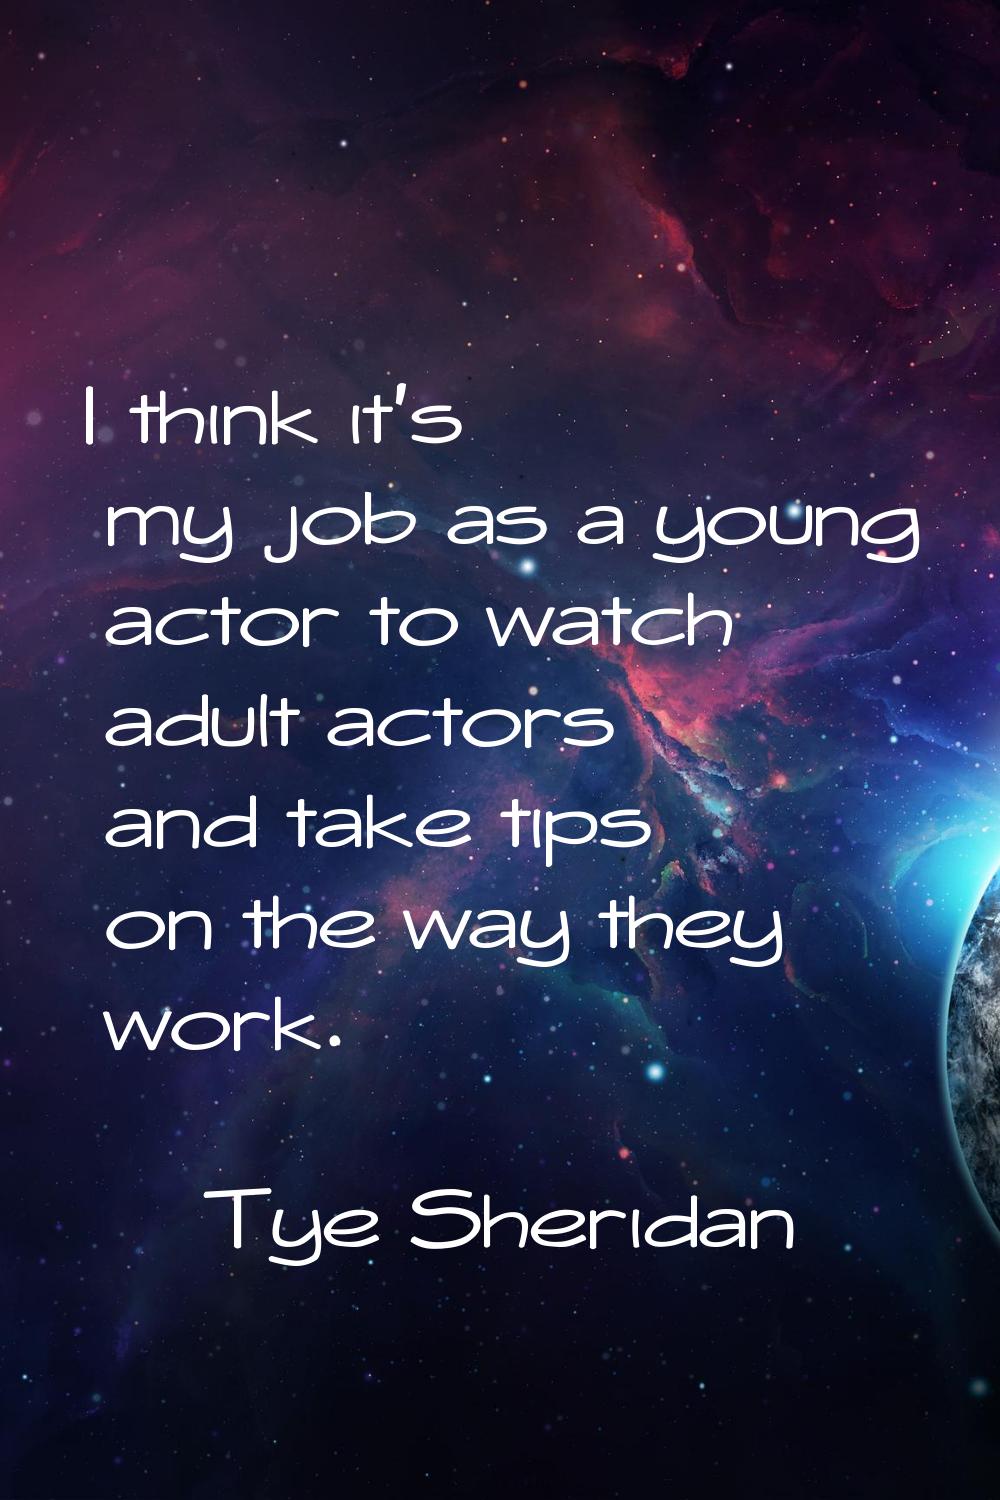 I think it's my job as a young actor to watch adult actors and take tips on the way they work.